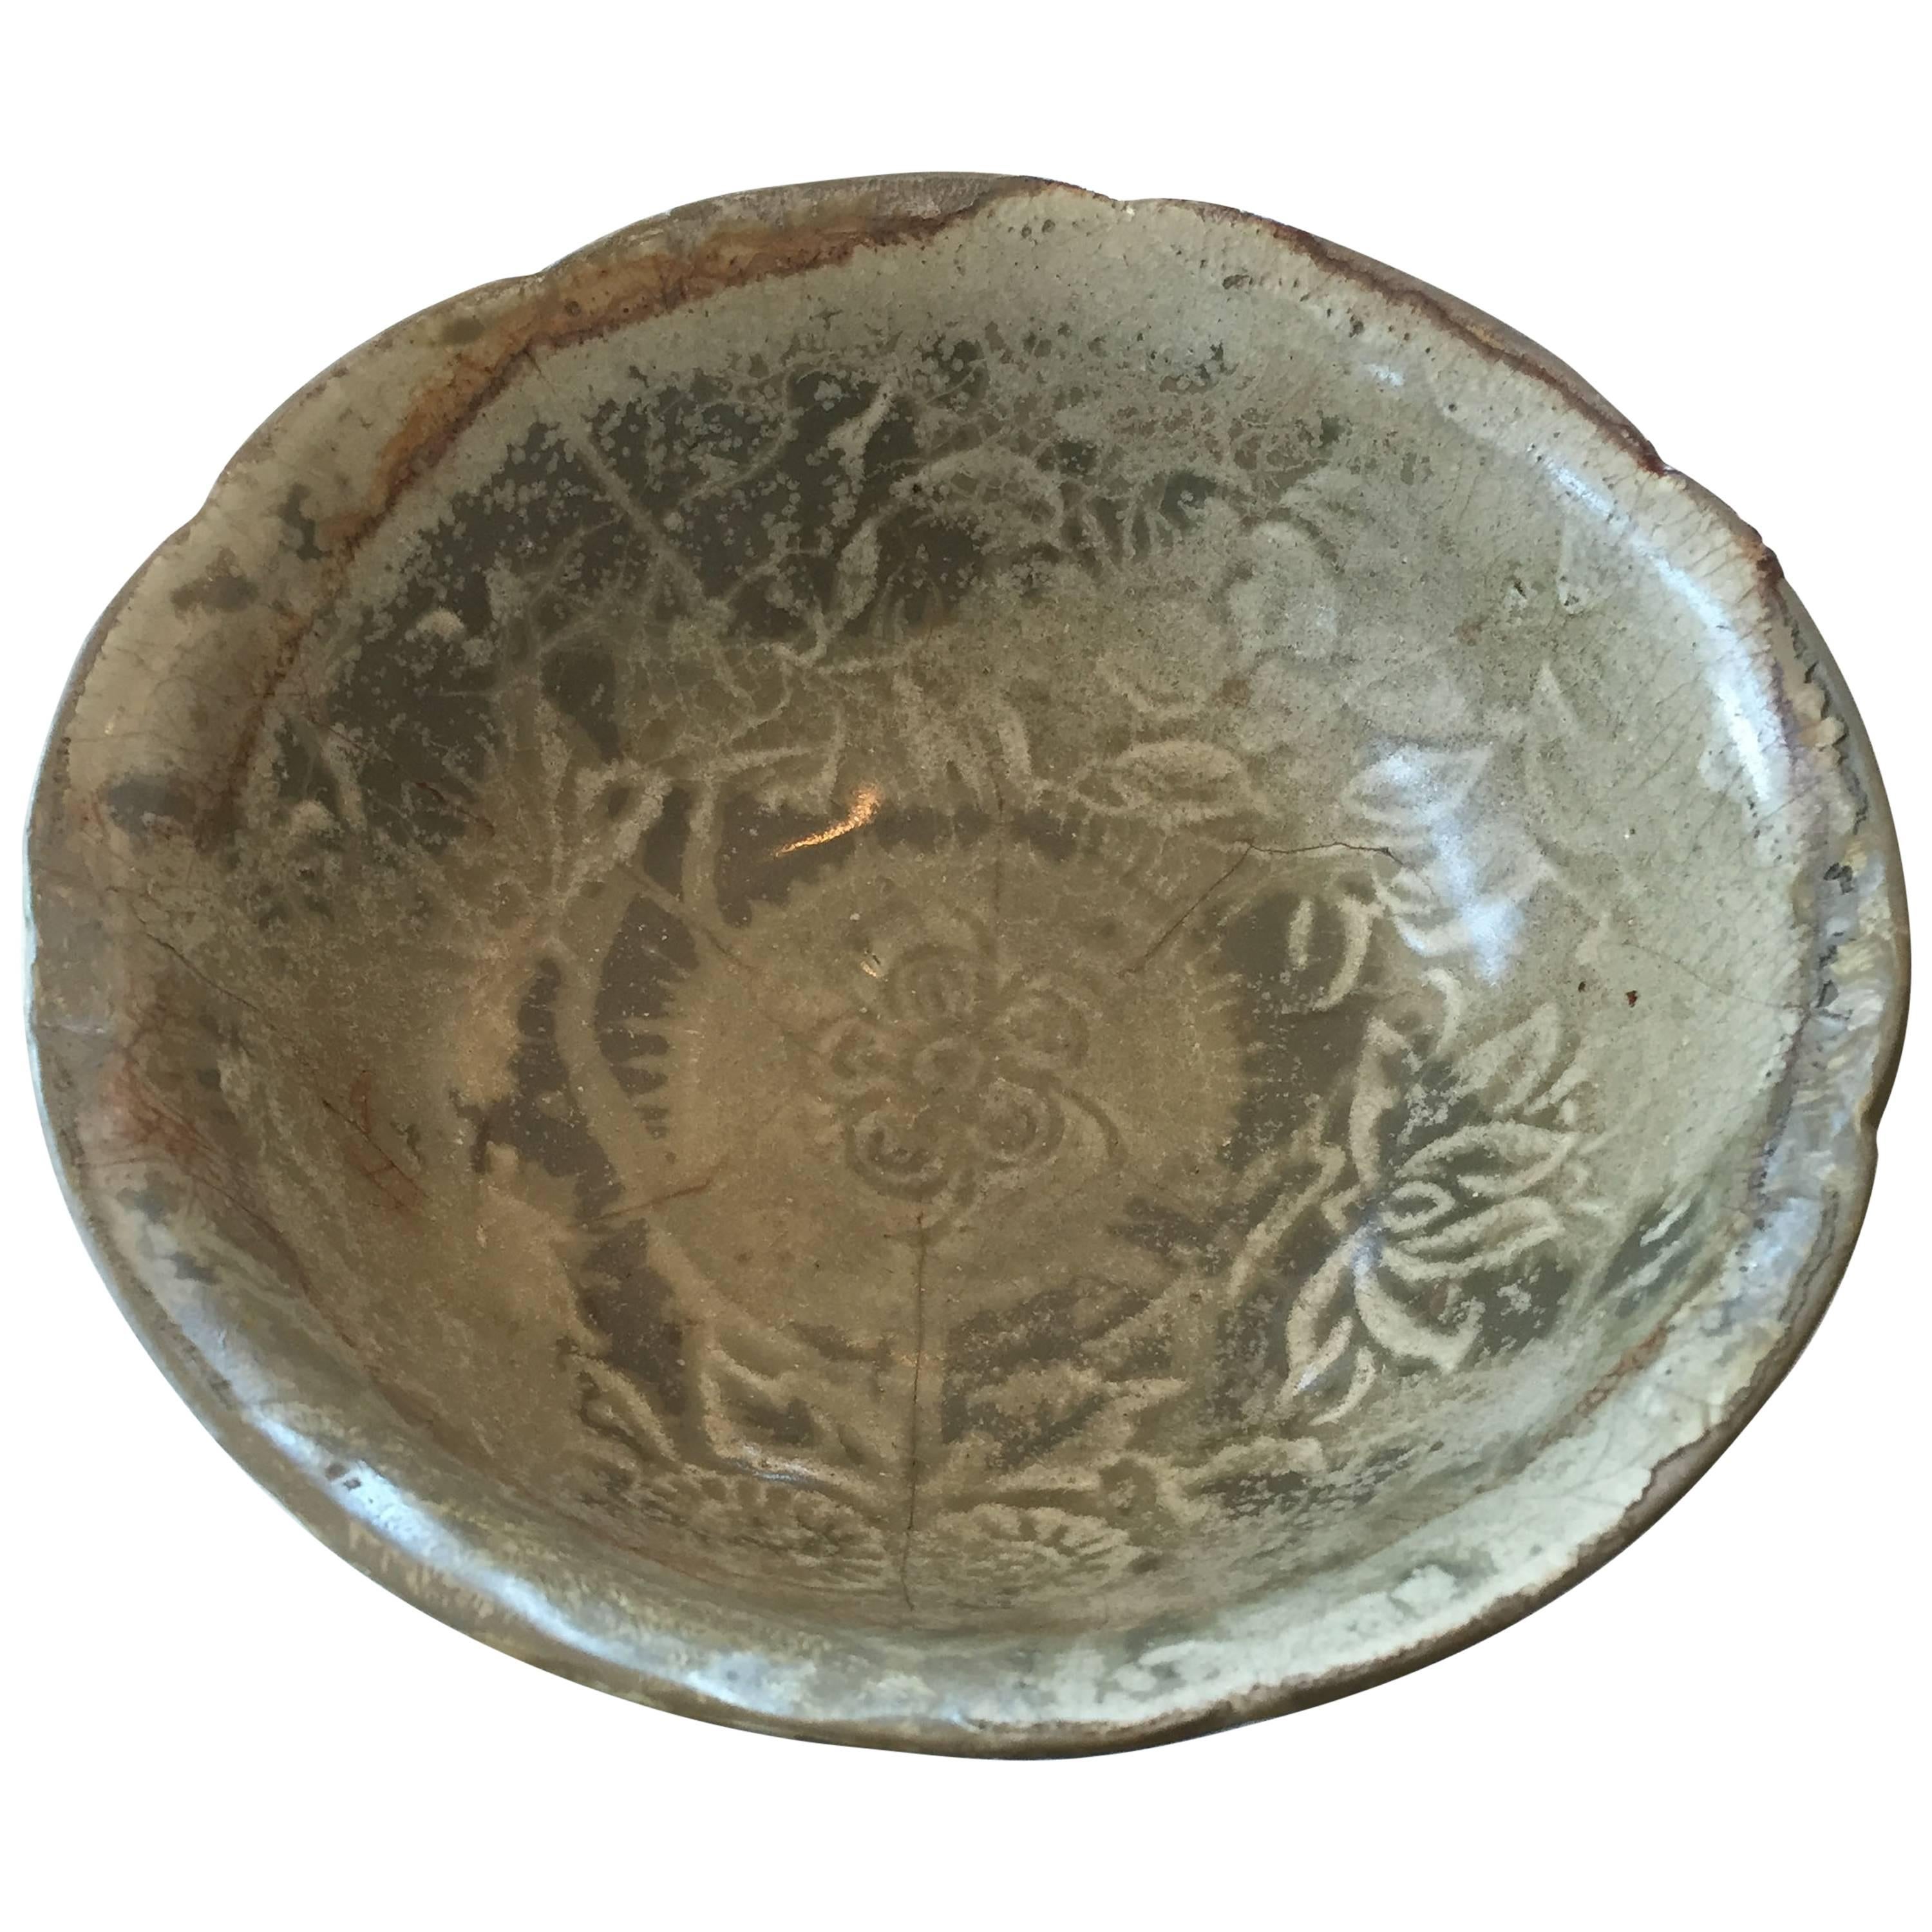 15th Century Handmade and Glazed Celadon Pottery Bowl from Thailand